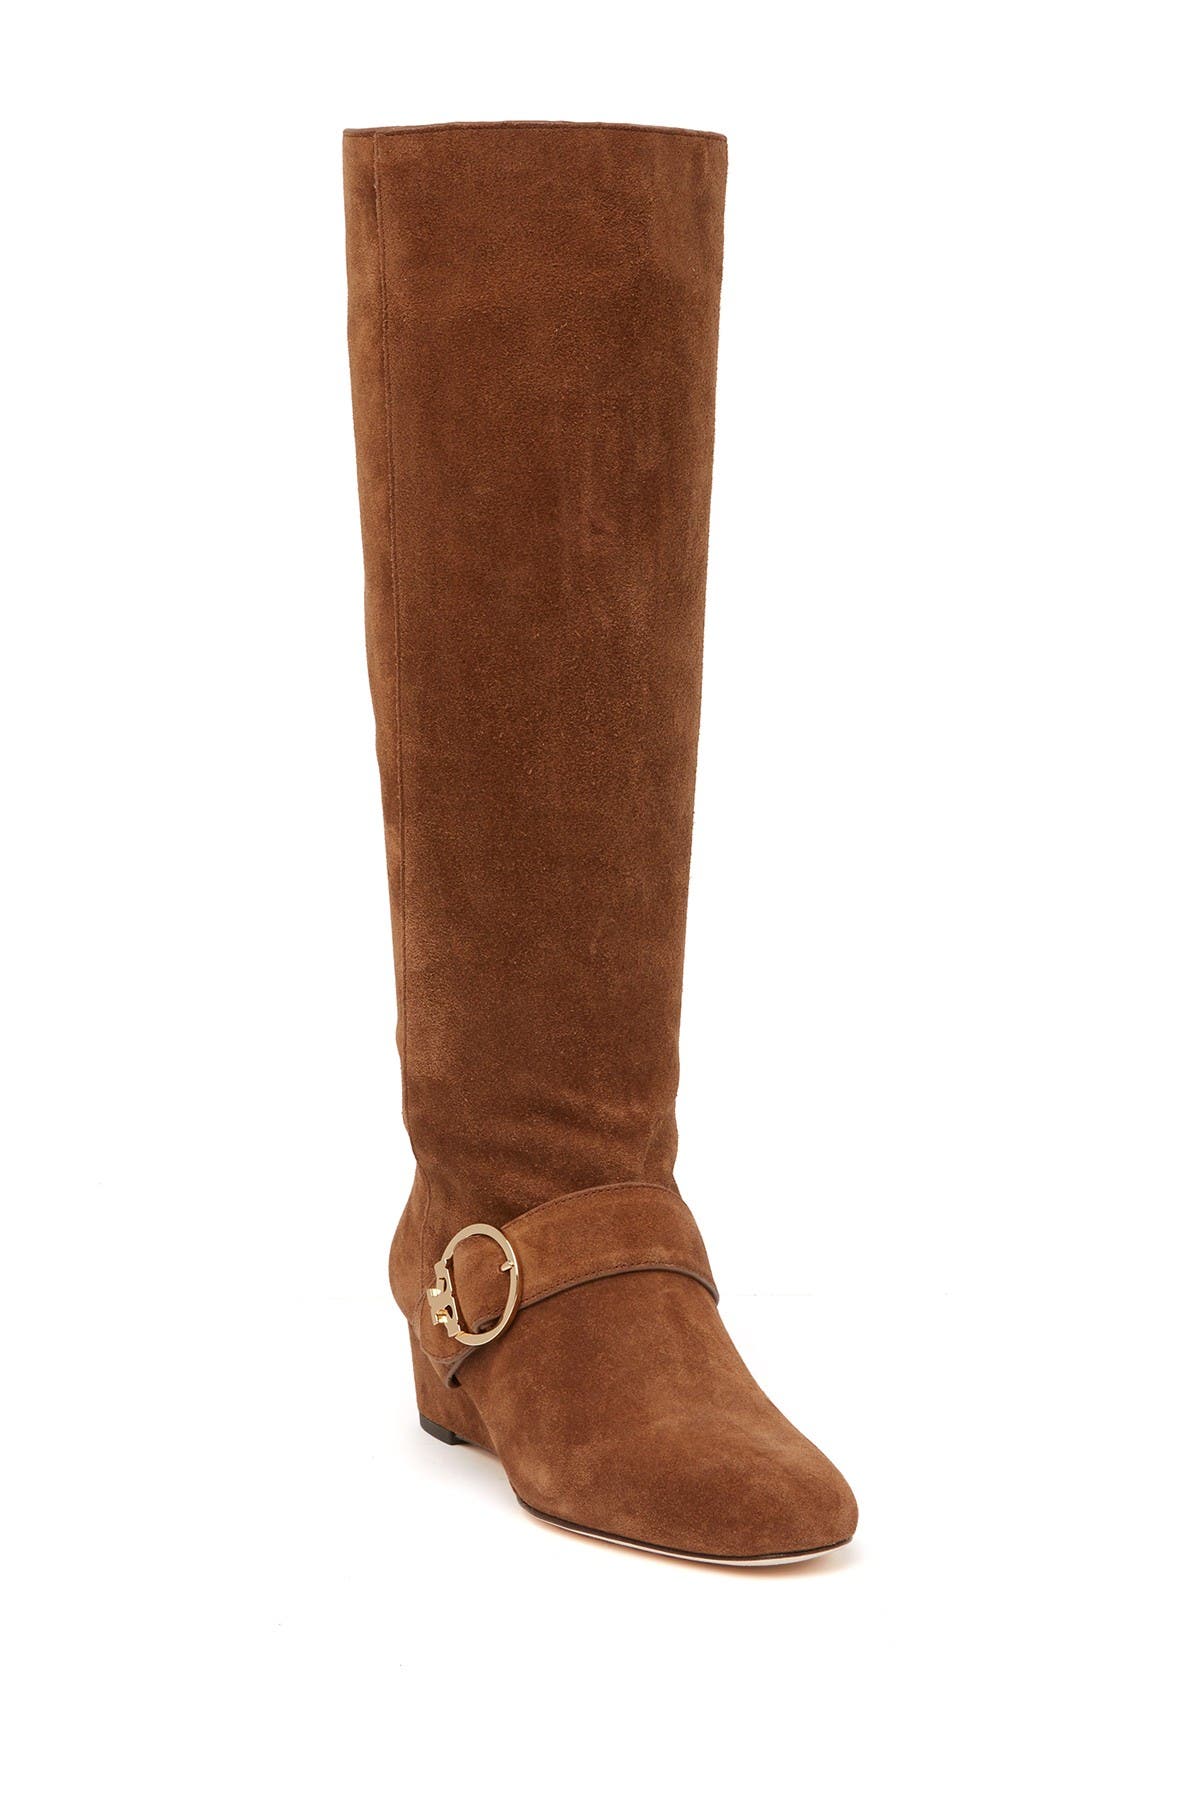 Tory Burch | Sofia Low Wedge Suede Boot 